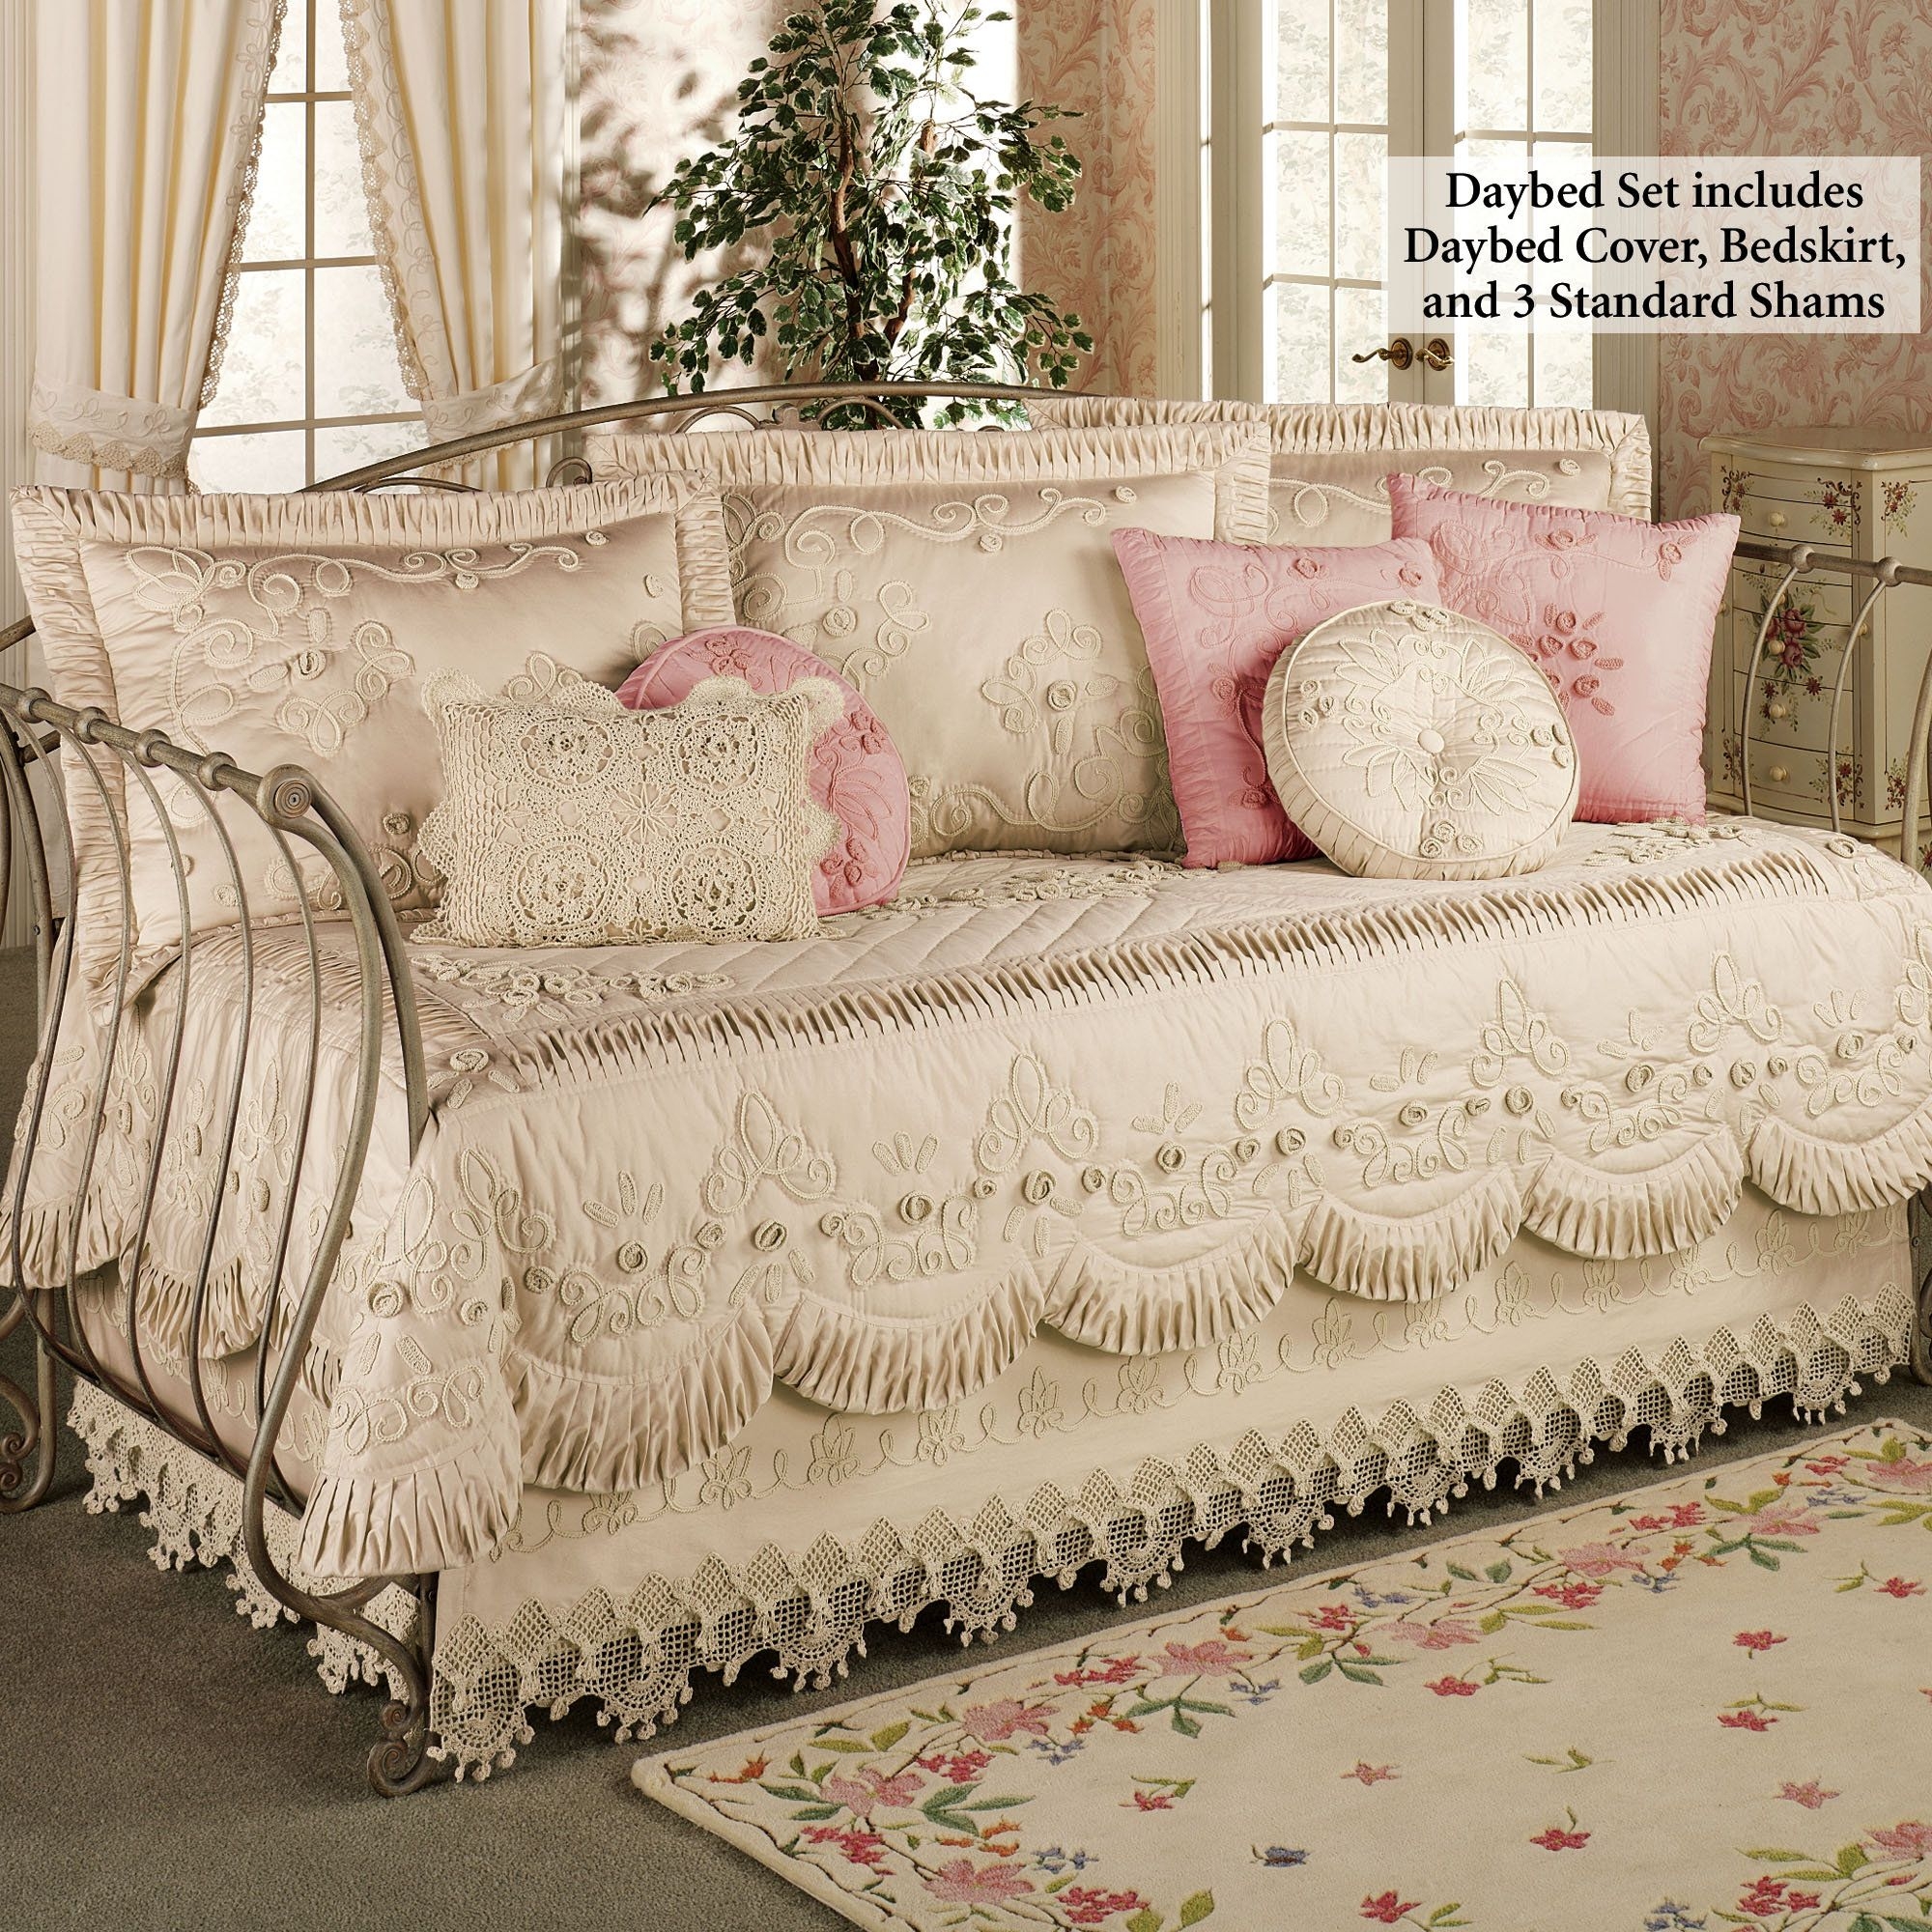 Unique Daybed Bedding Covers Ideas On Foter